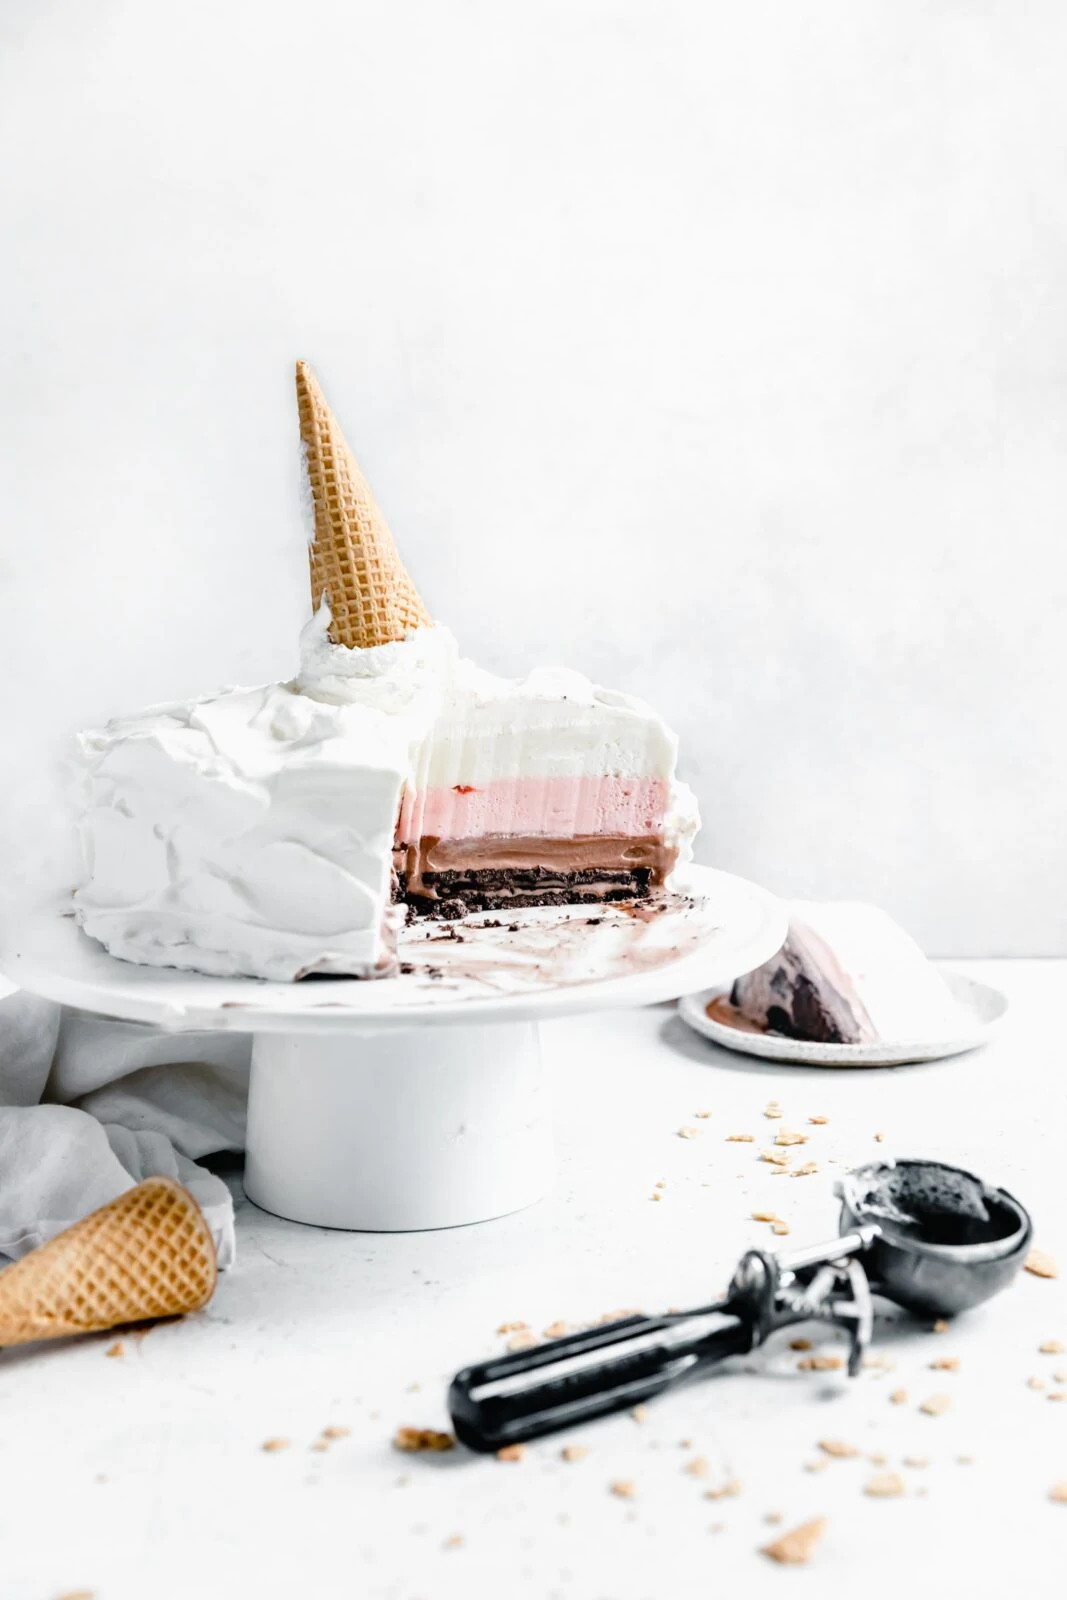 Neapolitan ice cream cake with slice out